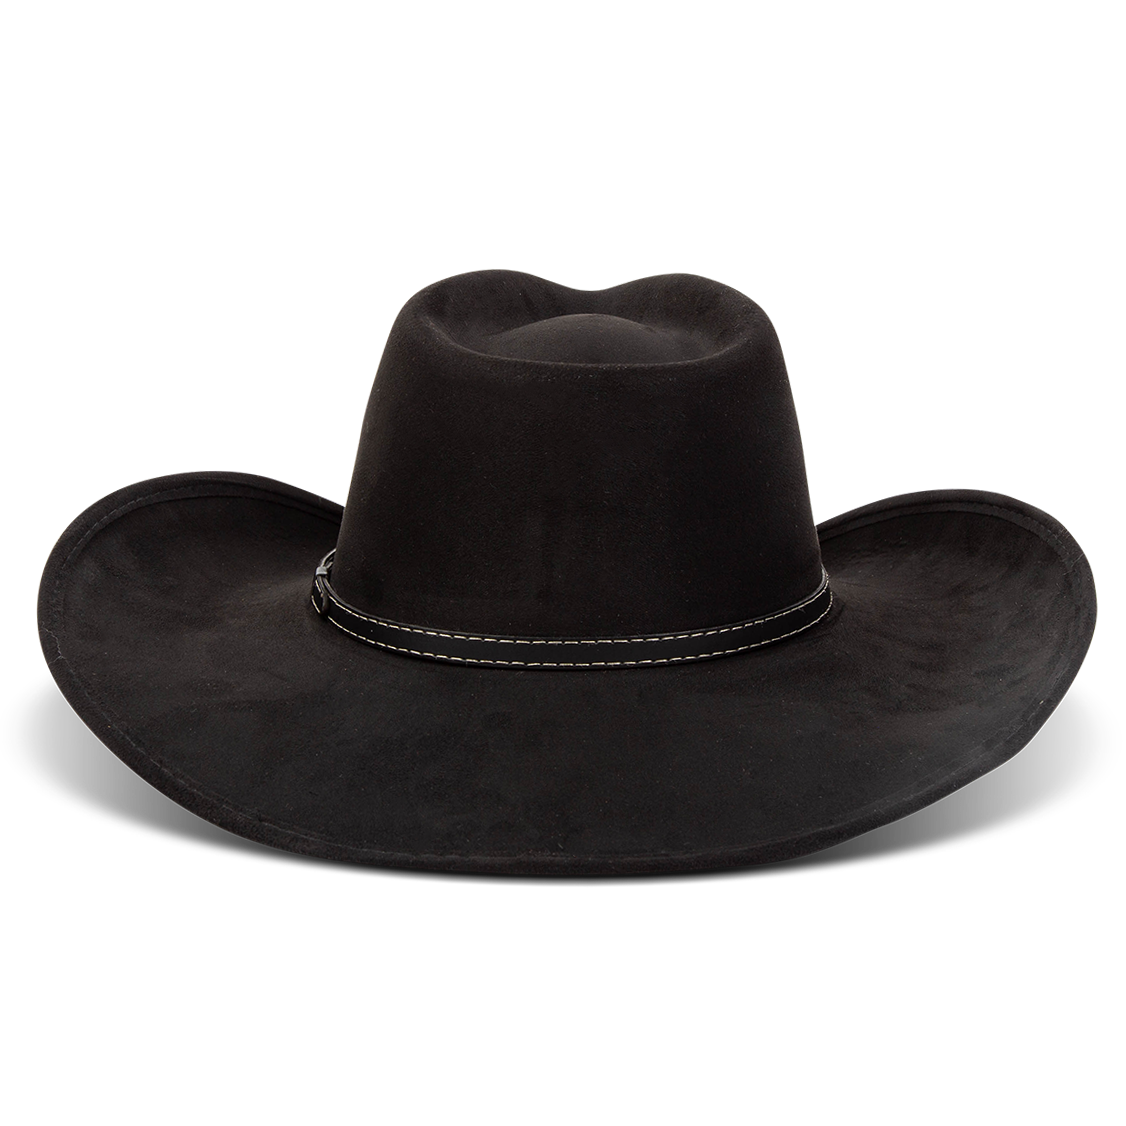 Jones black back view showing braided leather band on FREEBIRD western cowboy hat featuring teardrop crown and upturned-brim